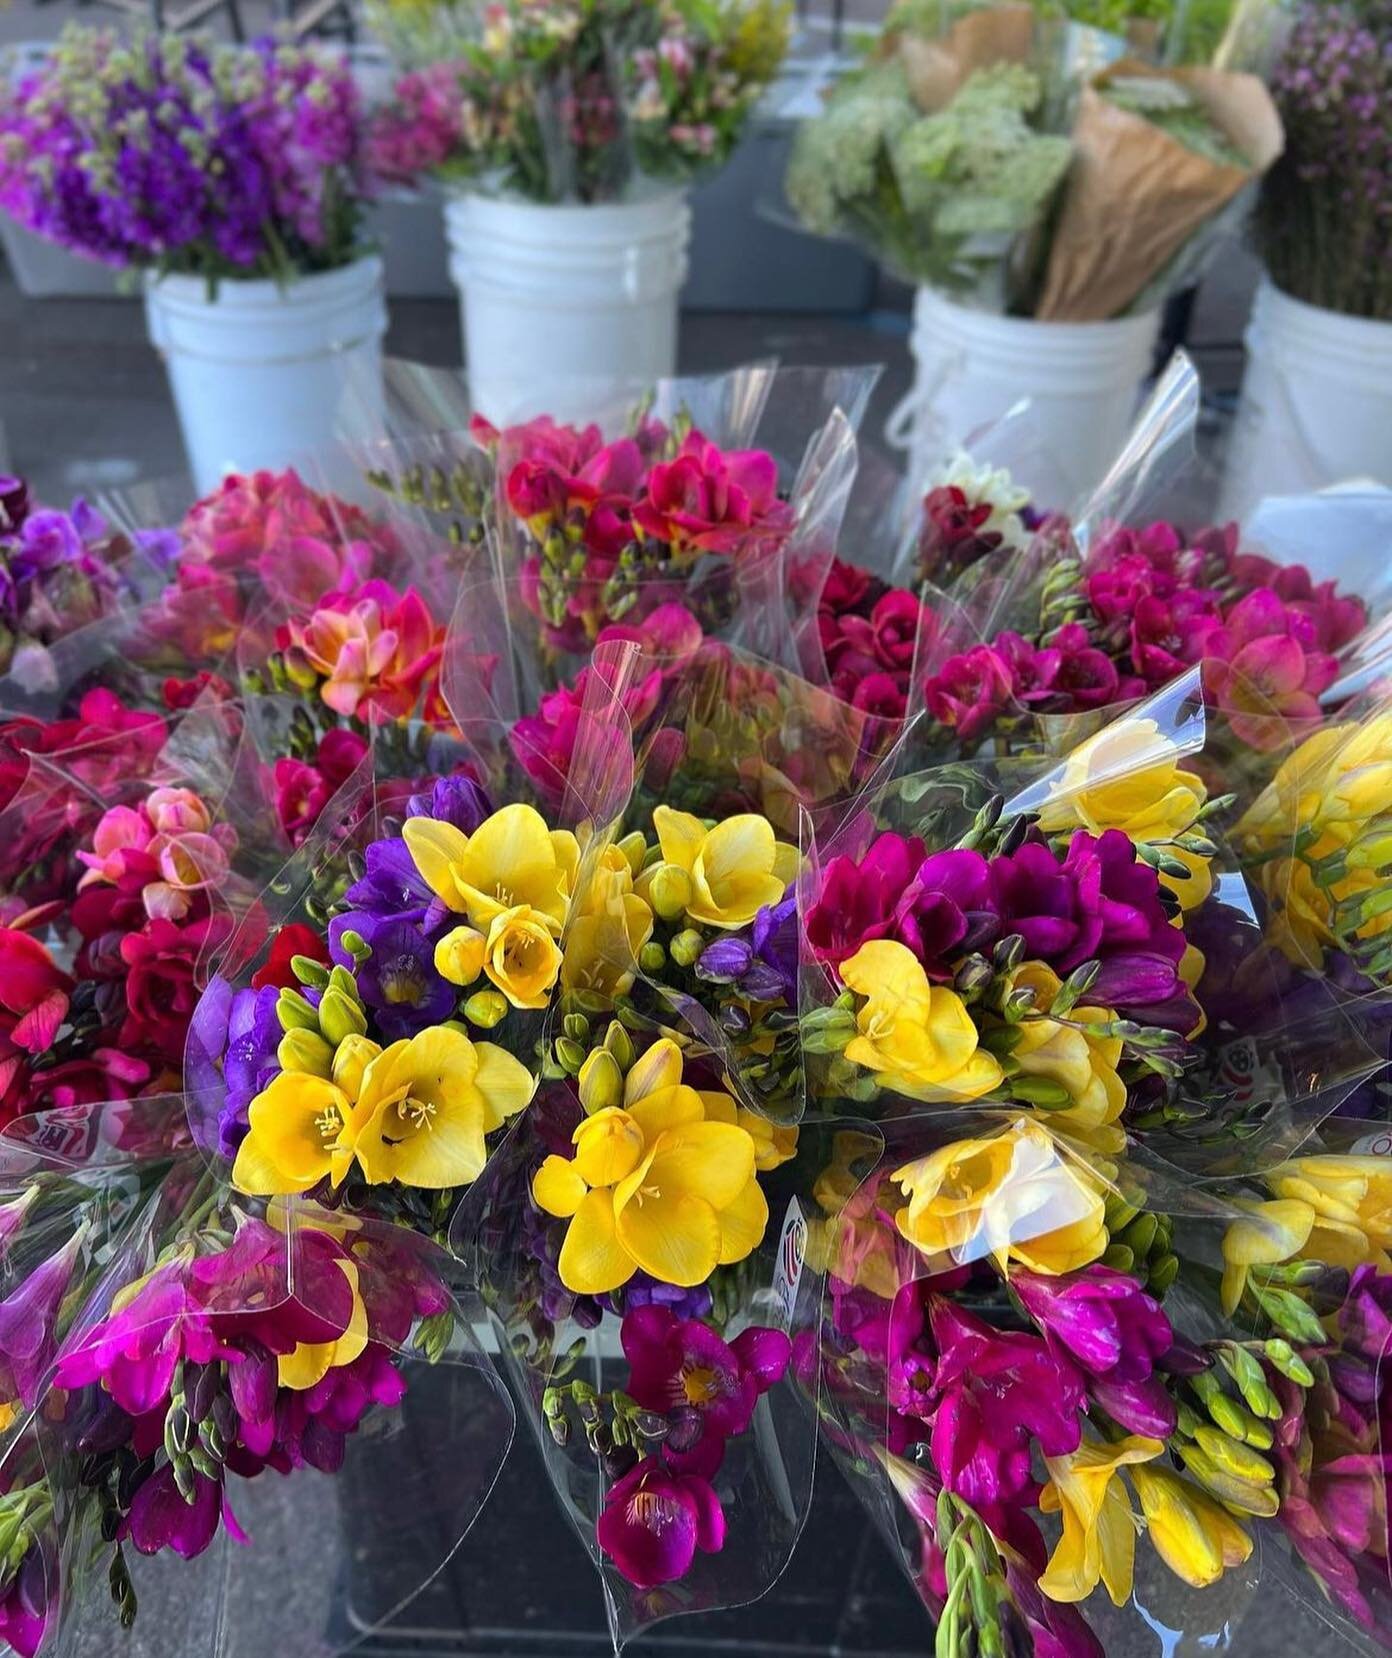 Freesia season in full swing at the markets, it&rsquo;s the most wonderful time of the year! Just like food, you keep farmers farming when you buy flowers direct from the grower at your favorite farmers markets. #freesia #freshflowers #farmersmarkets